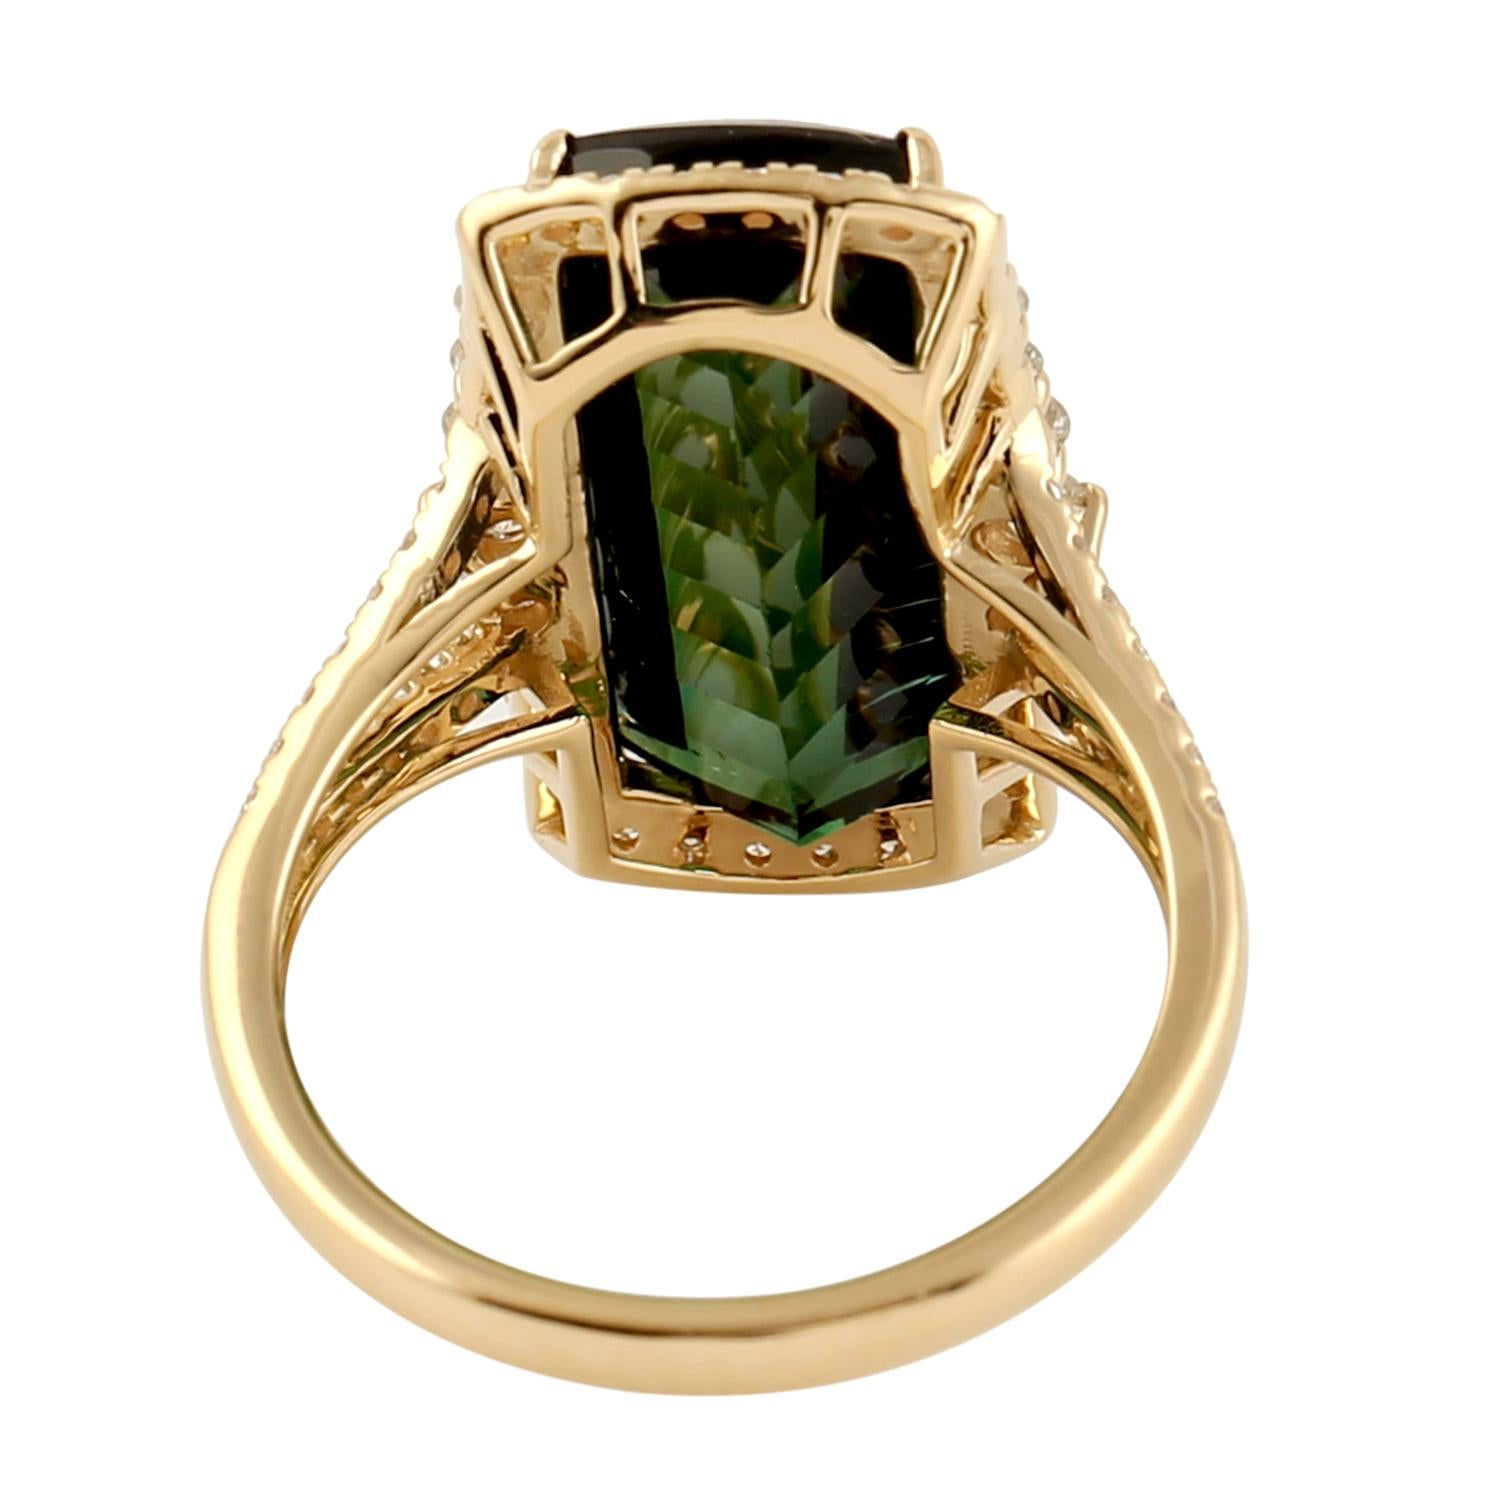 Mixed Cut Green Tourmaline Cocktail Ring With Pave Diamonds Made In 18k yellow Gold For Sale